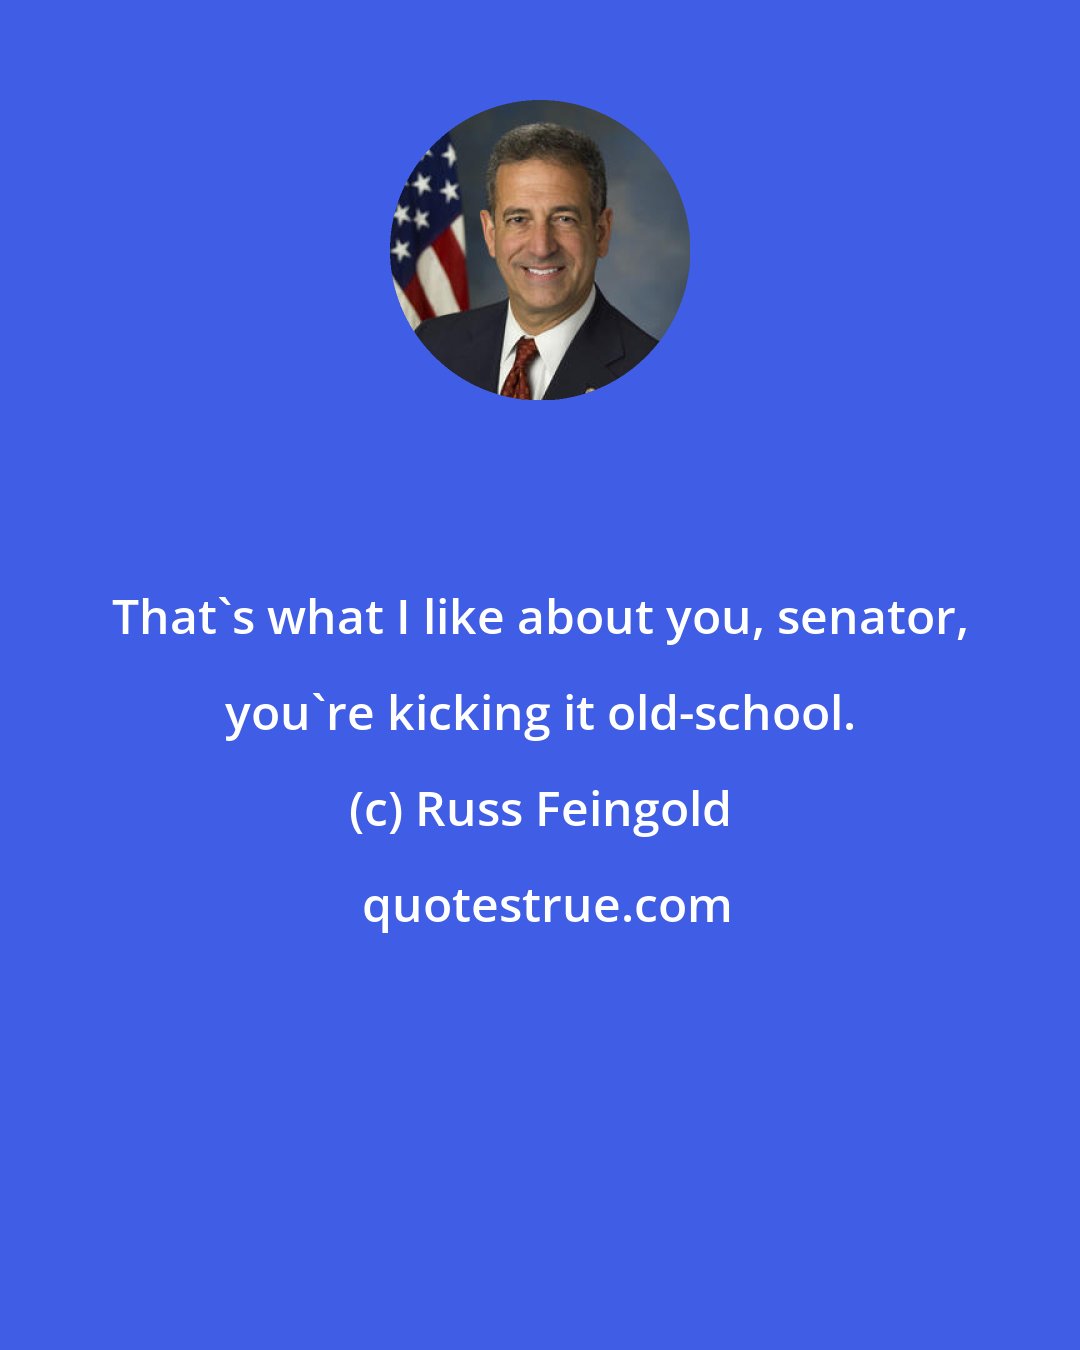 Russ Feingold: That's what I like about you, senator, you're kicking it old-school.